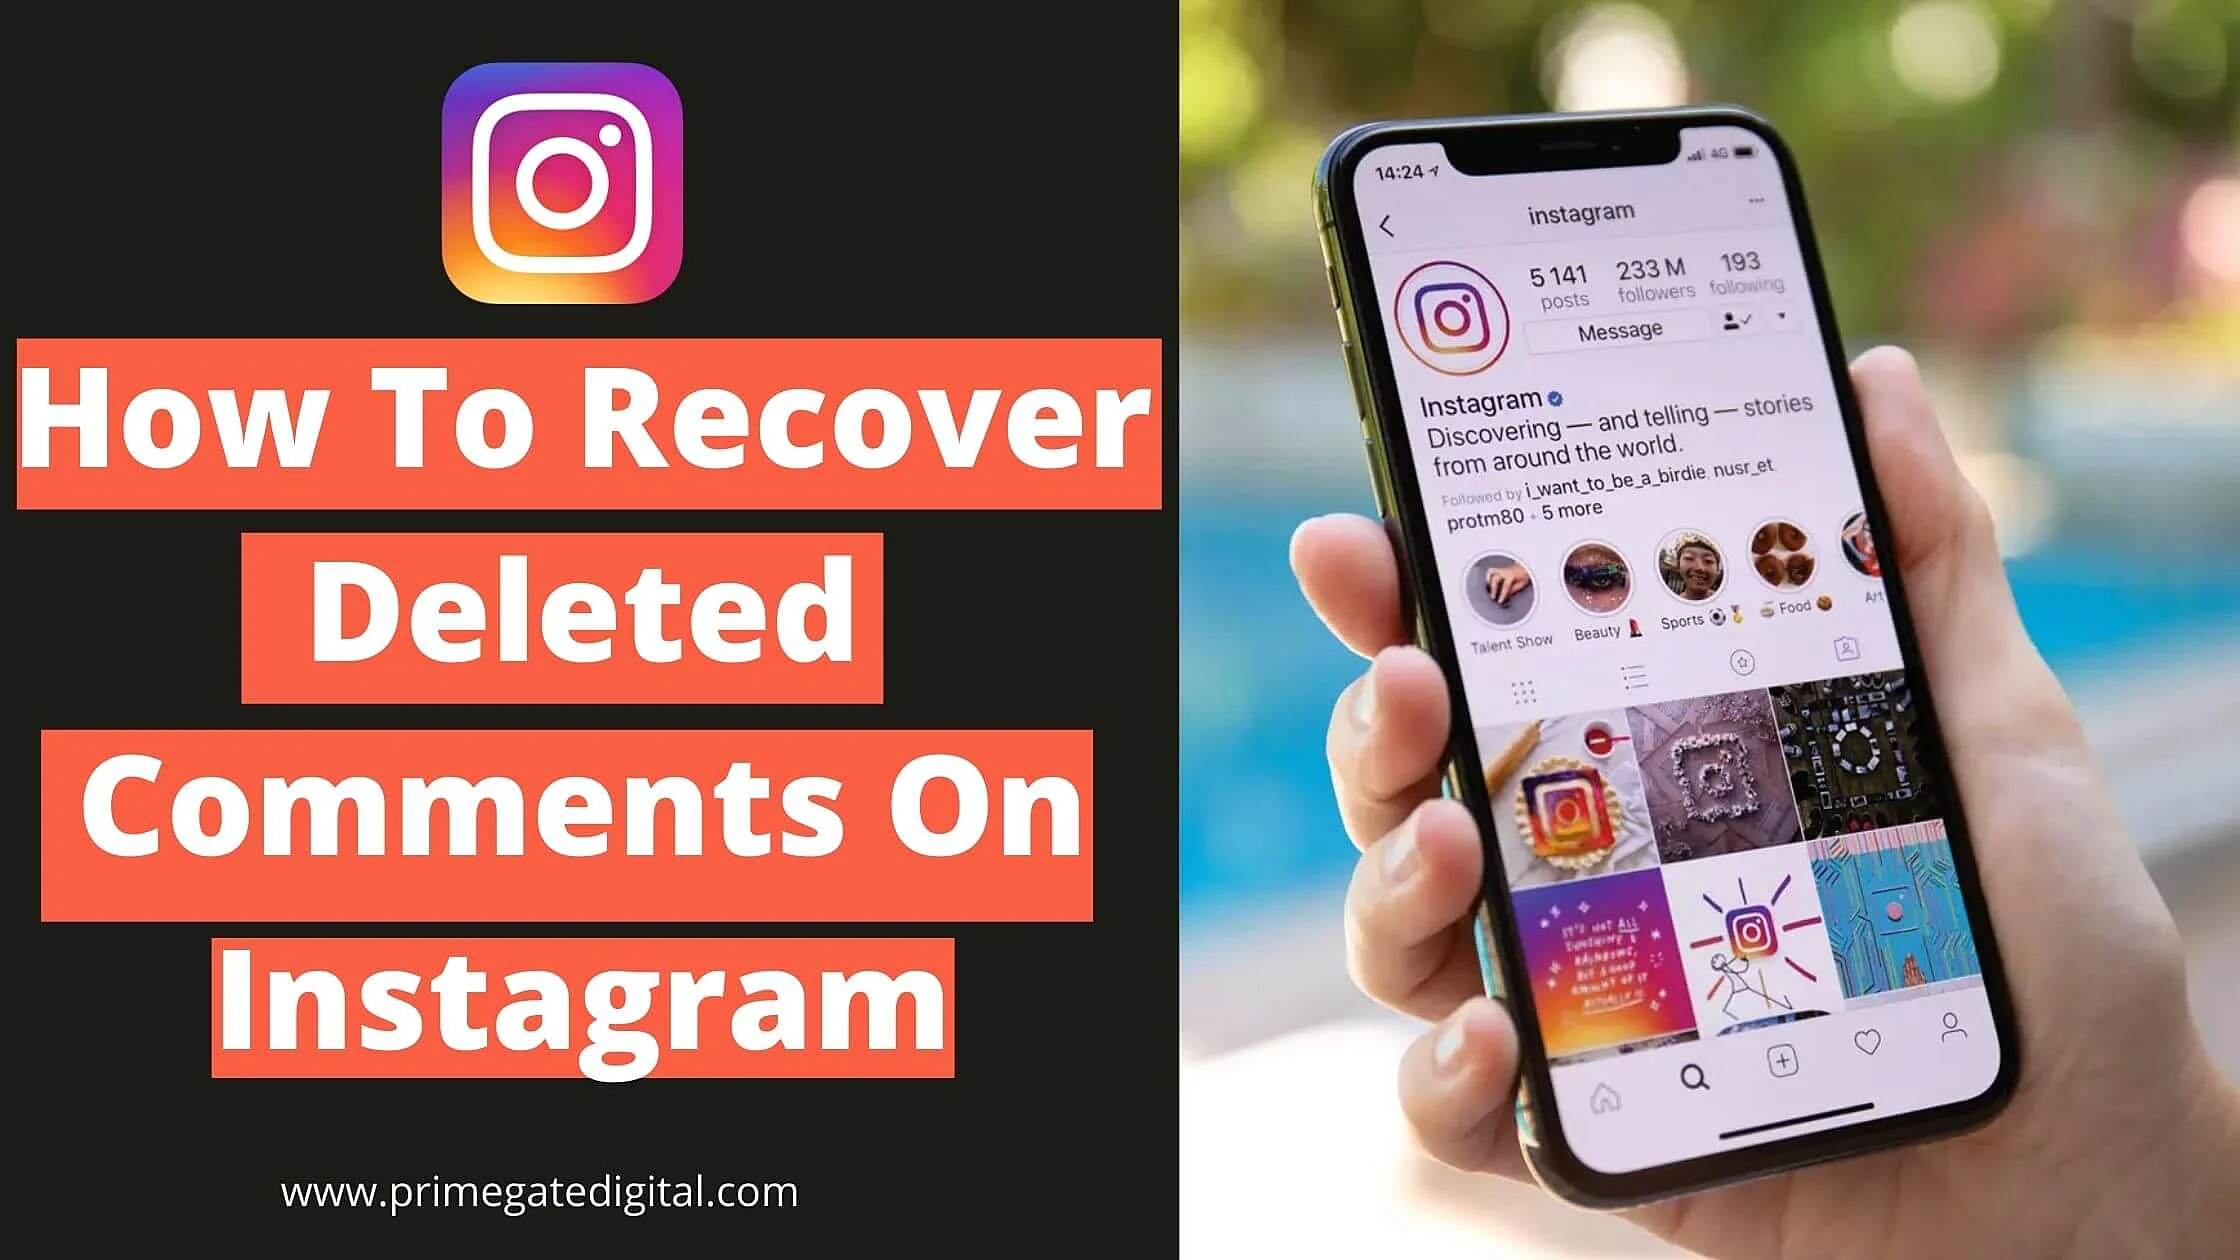 How to Recover Deleted Comments on Instagram